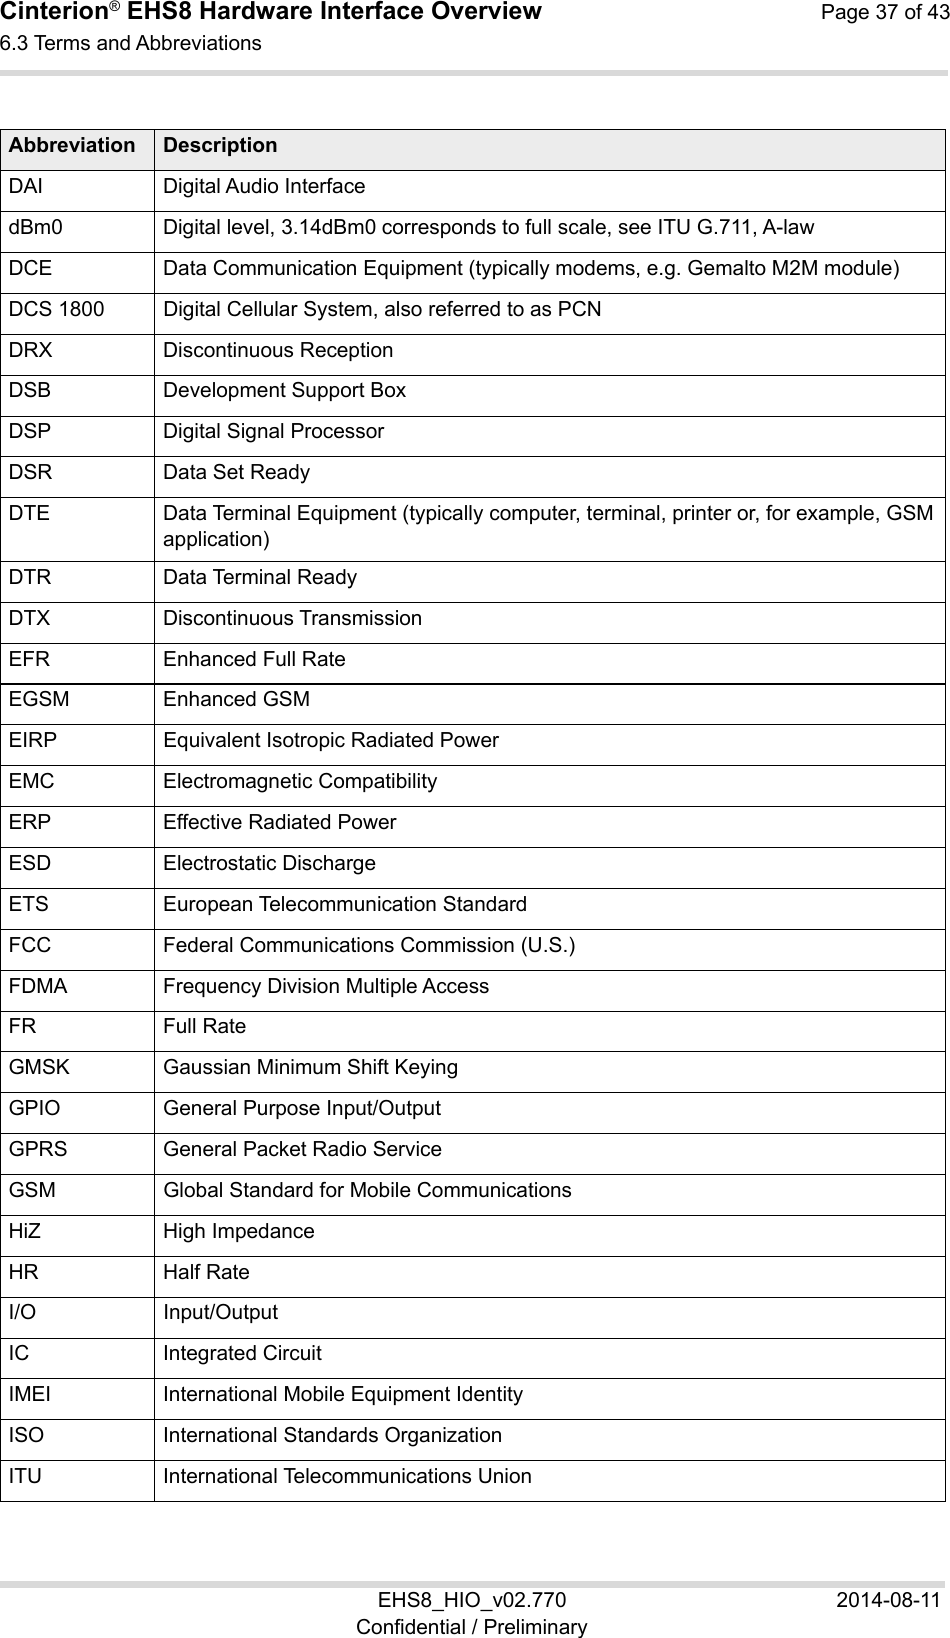 Cinterion® EHS8 Hardware Interface Overview  Page 37 of 43 6.3 Terms and Abbreviations 39 EHS8_HIO_v02.770  2014-08-11 Confidential / Preliminary  Abbreviation Description DAI Digital Audio InterfacedBm0 Digital level, 3.14dBm0 corresponds to full scale, see ITU G.711, A-law DCE Data Communication Equipment (typically modems, e.g. Gemalto M2M module)DCS 1800 Digital Cellular System, also referred to as PCNDRX Discontinuous ReceptionDSB Development Support BoxDSP Digital Signal ProcessorDSR Data Set Ready DTE Data Terminal Equipment (typically computer, terminal, printer or, for example, GSM application) DTR Data Terminal Ready DTX Discontinuous TransmissionEFR Enhanced Full Rate EGSM Enhanced GSM EIRP Equivalent Isotropic Radiated PowerEMC Electromagnetic CompatibilityERP Effective Radiated PowerESD Electrostatic DischargeETS European Telecommunication StandardFCC Federal Communications Commission (U.S.)FDMA Frequency Division Multiple AccessFR Full Rate GMSK Gaussian Minimum Shift KeyingGPIO General Purpose Input/OutputGPRS General Packet Radio ServiceGSM Global Standard for Mobile CommunicationsHiZ High Impedance HR Half Rate I/O Input/Output IC Integrated Circuit IMEI International Mobile Equipment IdentityISO International Standards OrganizationITU International Telecommunications Union